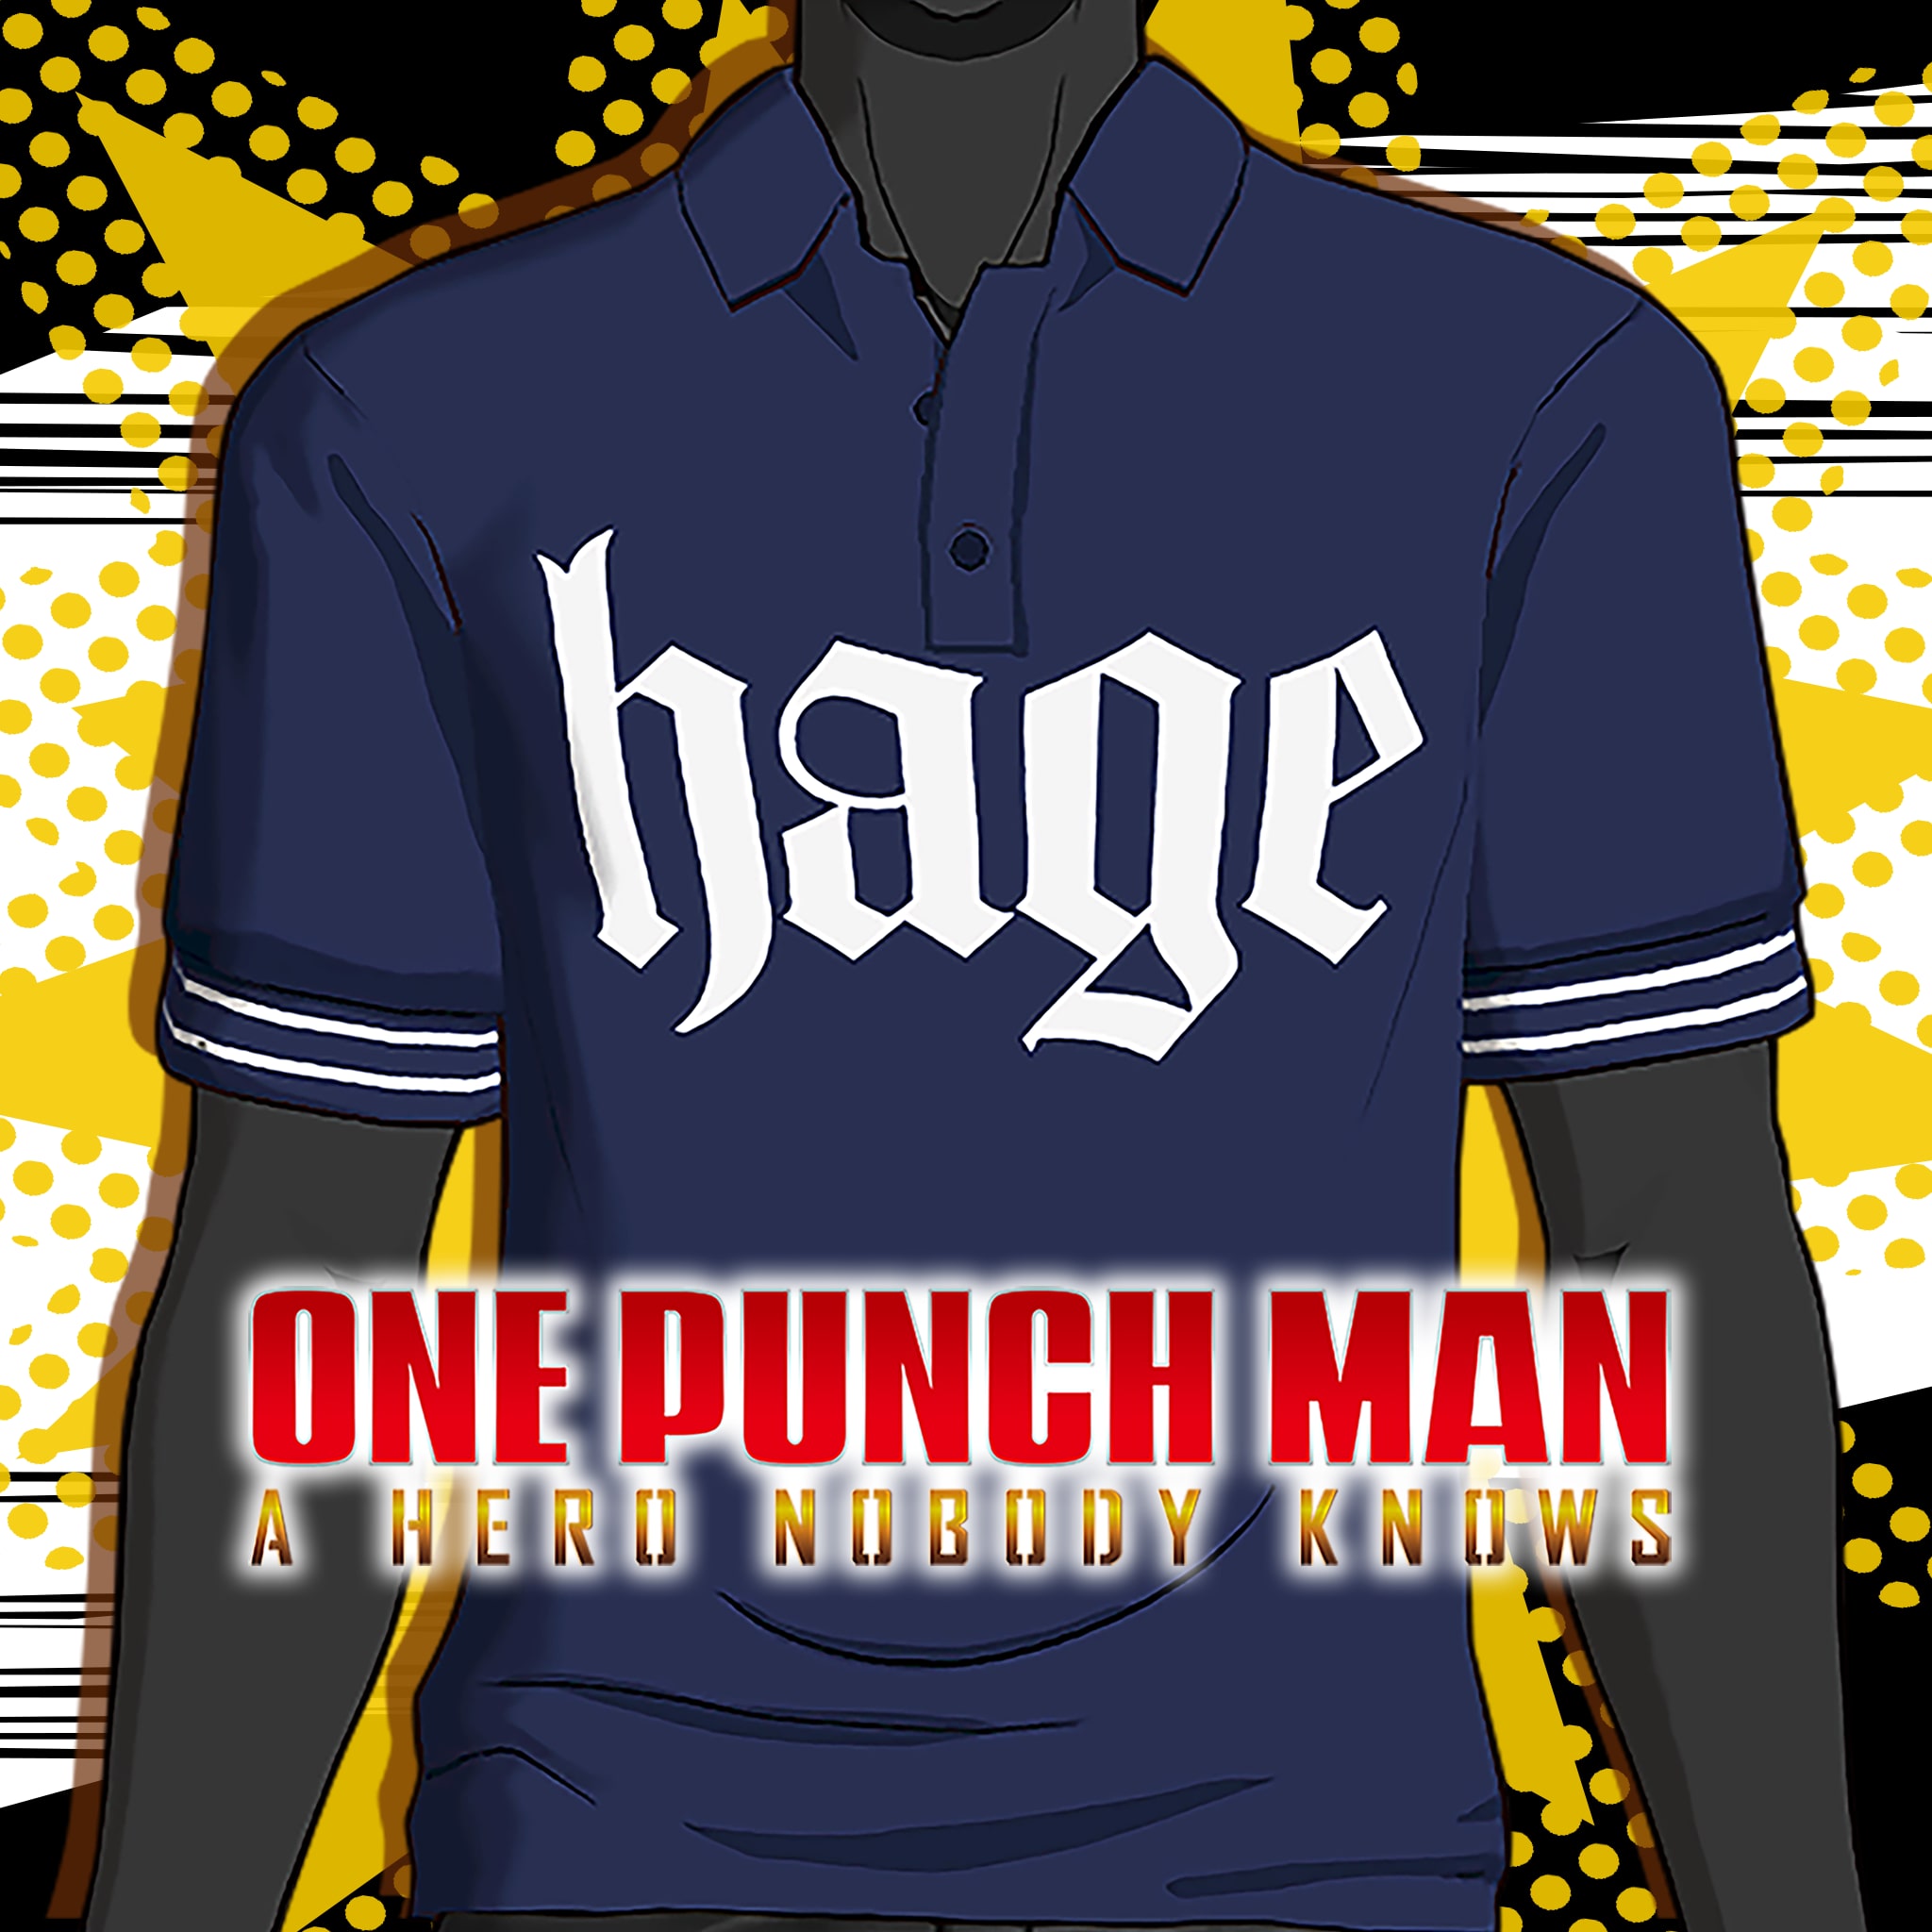 ONE PUNCH MAN: A HERO NOBODY KNOWS 'hage' Polo Shirt